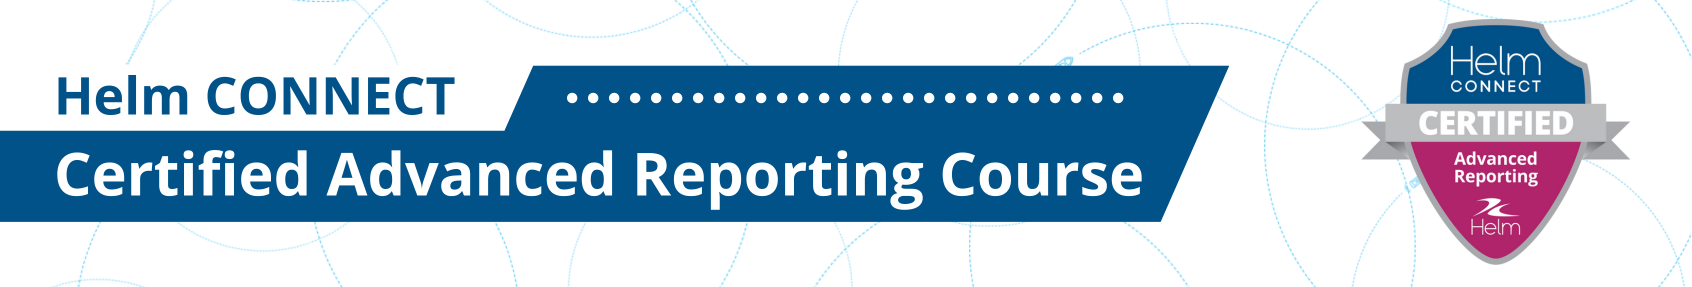 Helm CONNECT Certified Advanced Reporting Course - footer